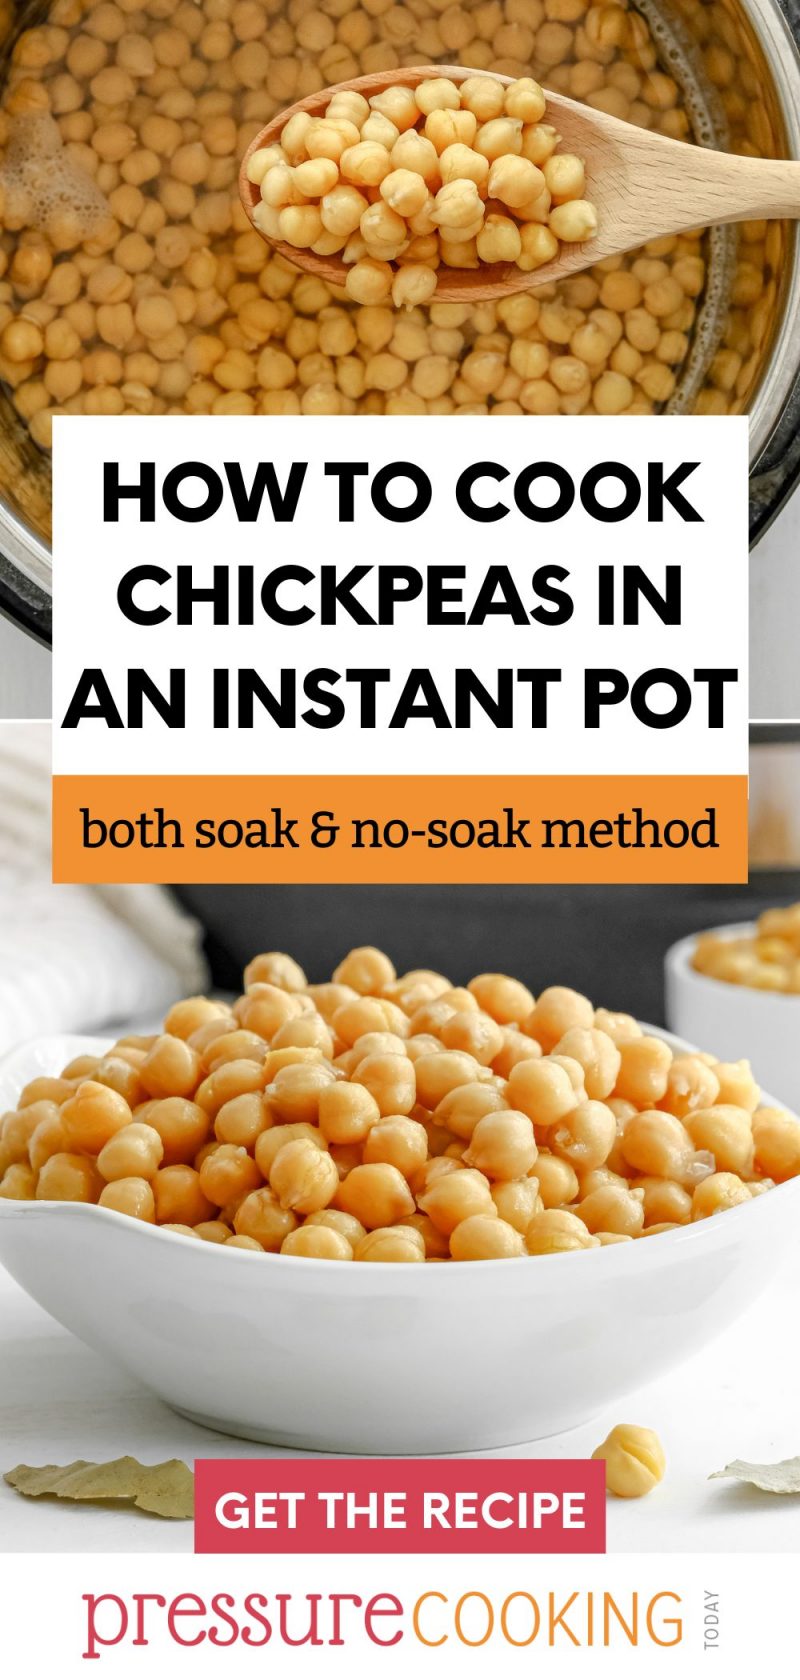 Pinterest image promoting the post "how to cook chickpeas in the Instant Pot" featuring a top image of a wooden spoon of chickpeas suspended above an Instapot full of cooked chickpeas. The bottom image shows a white bowl full of cooked chickpeas